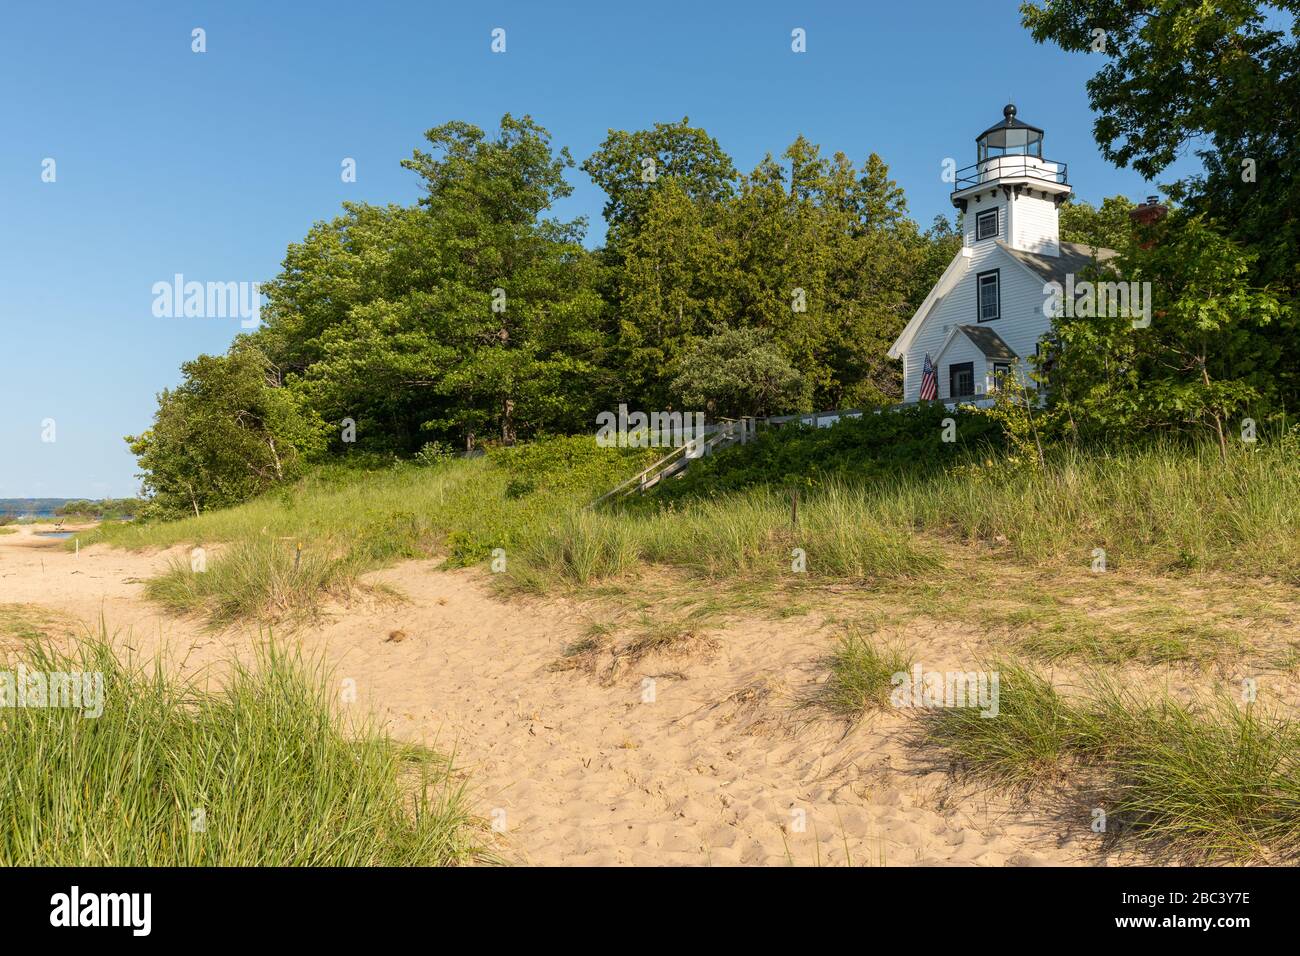 The light house on Old Mission Peninsula in Michigan Stock Photo